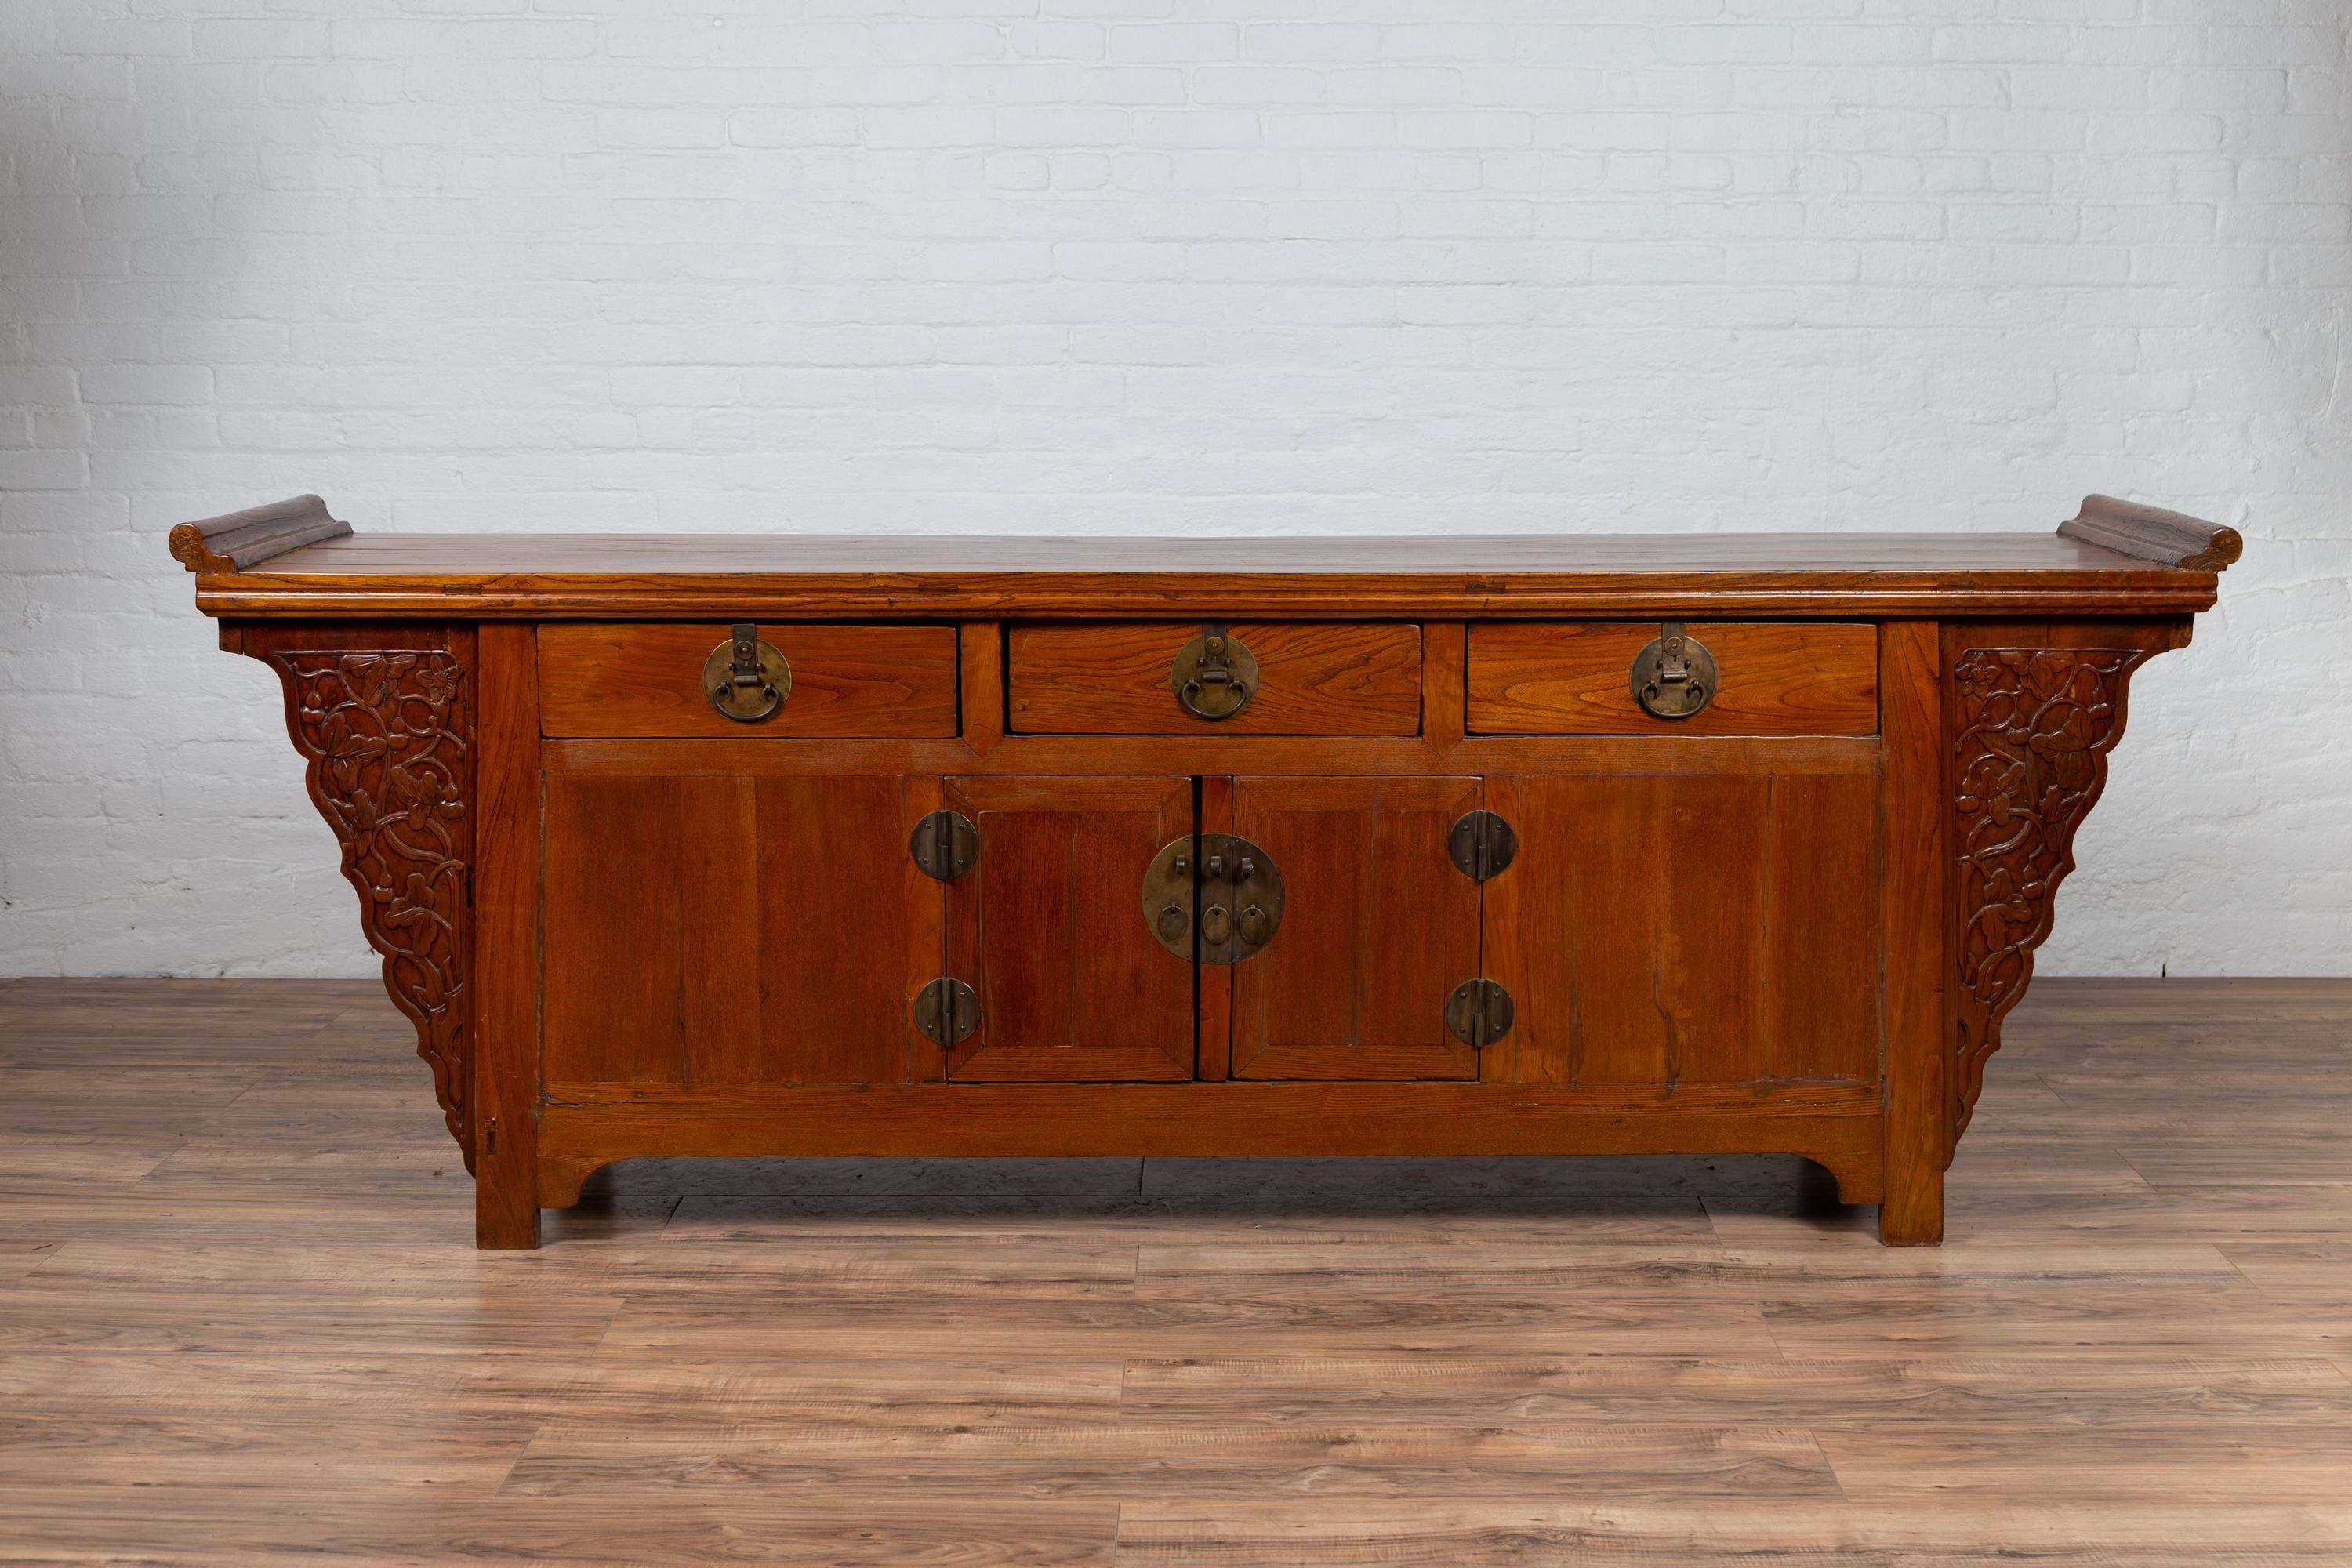 A large antique Chinese Ming dynasty style altar cabinet from the early 20th century, with everted flanges, three drawers over double doors and carved spandrels. Born in China during the early years of the 20th century, this exquisite sideboard